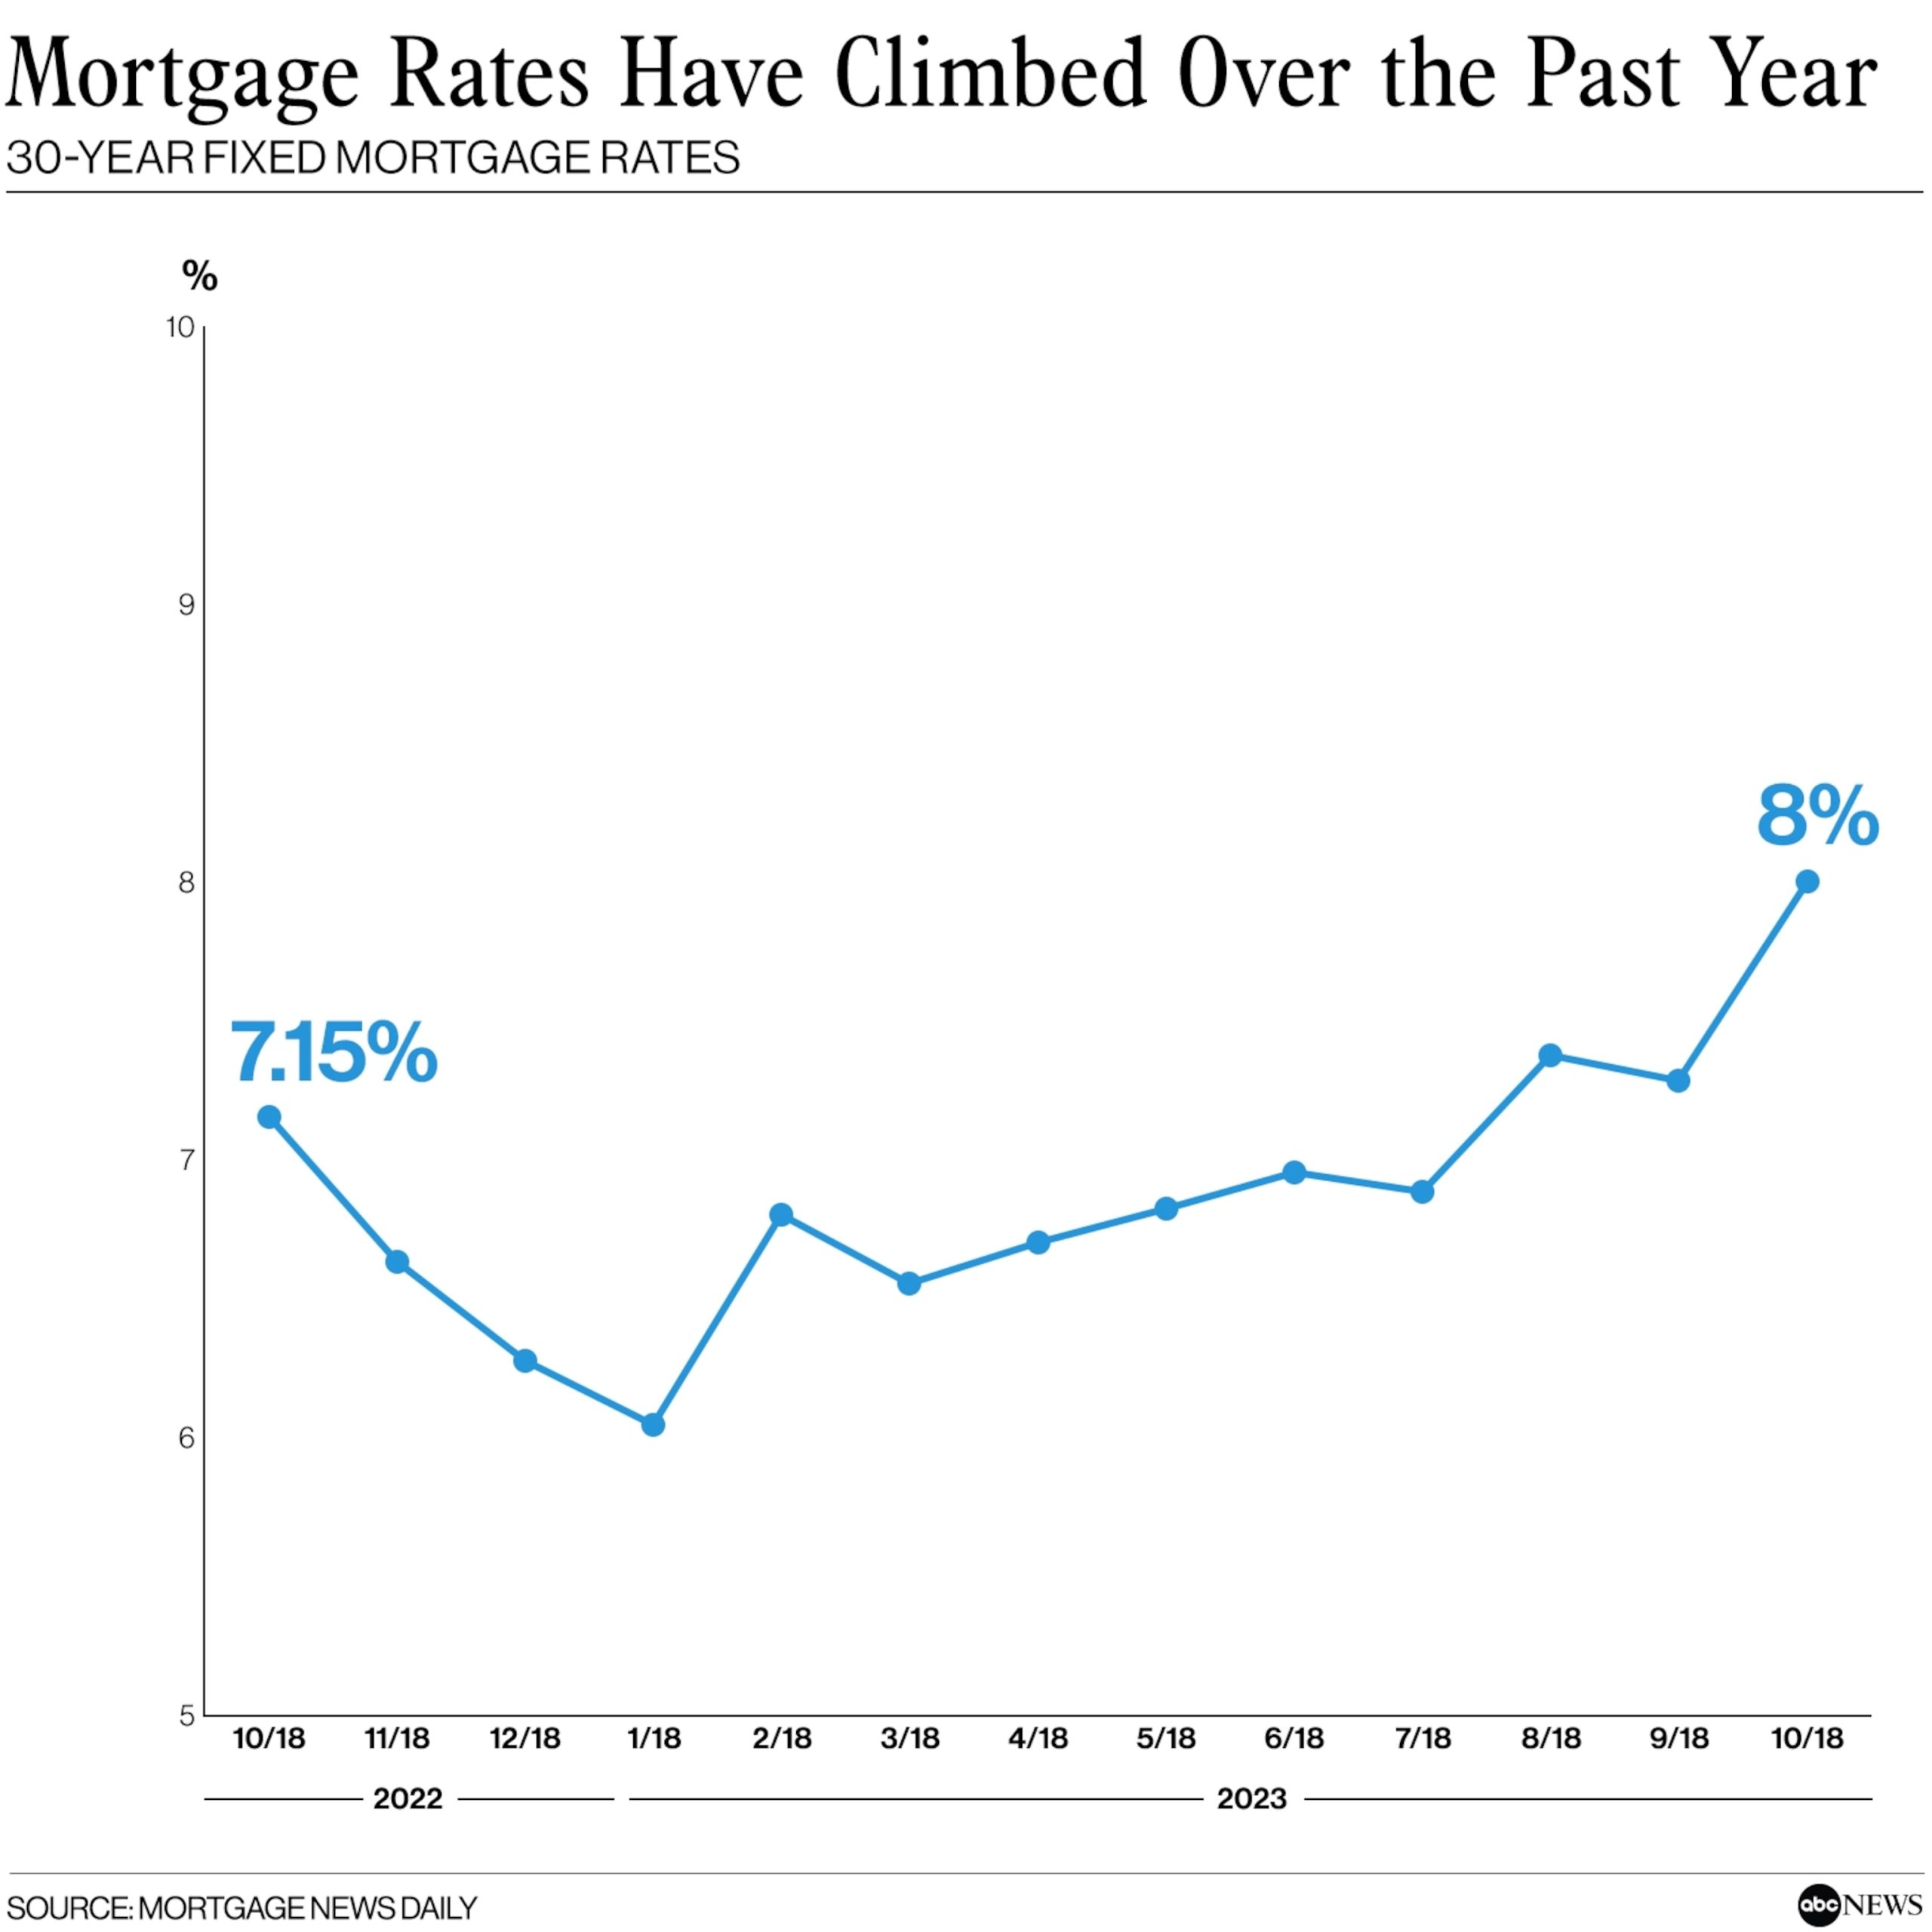 First time since 2000: Mortgage rates reach 8%